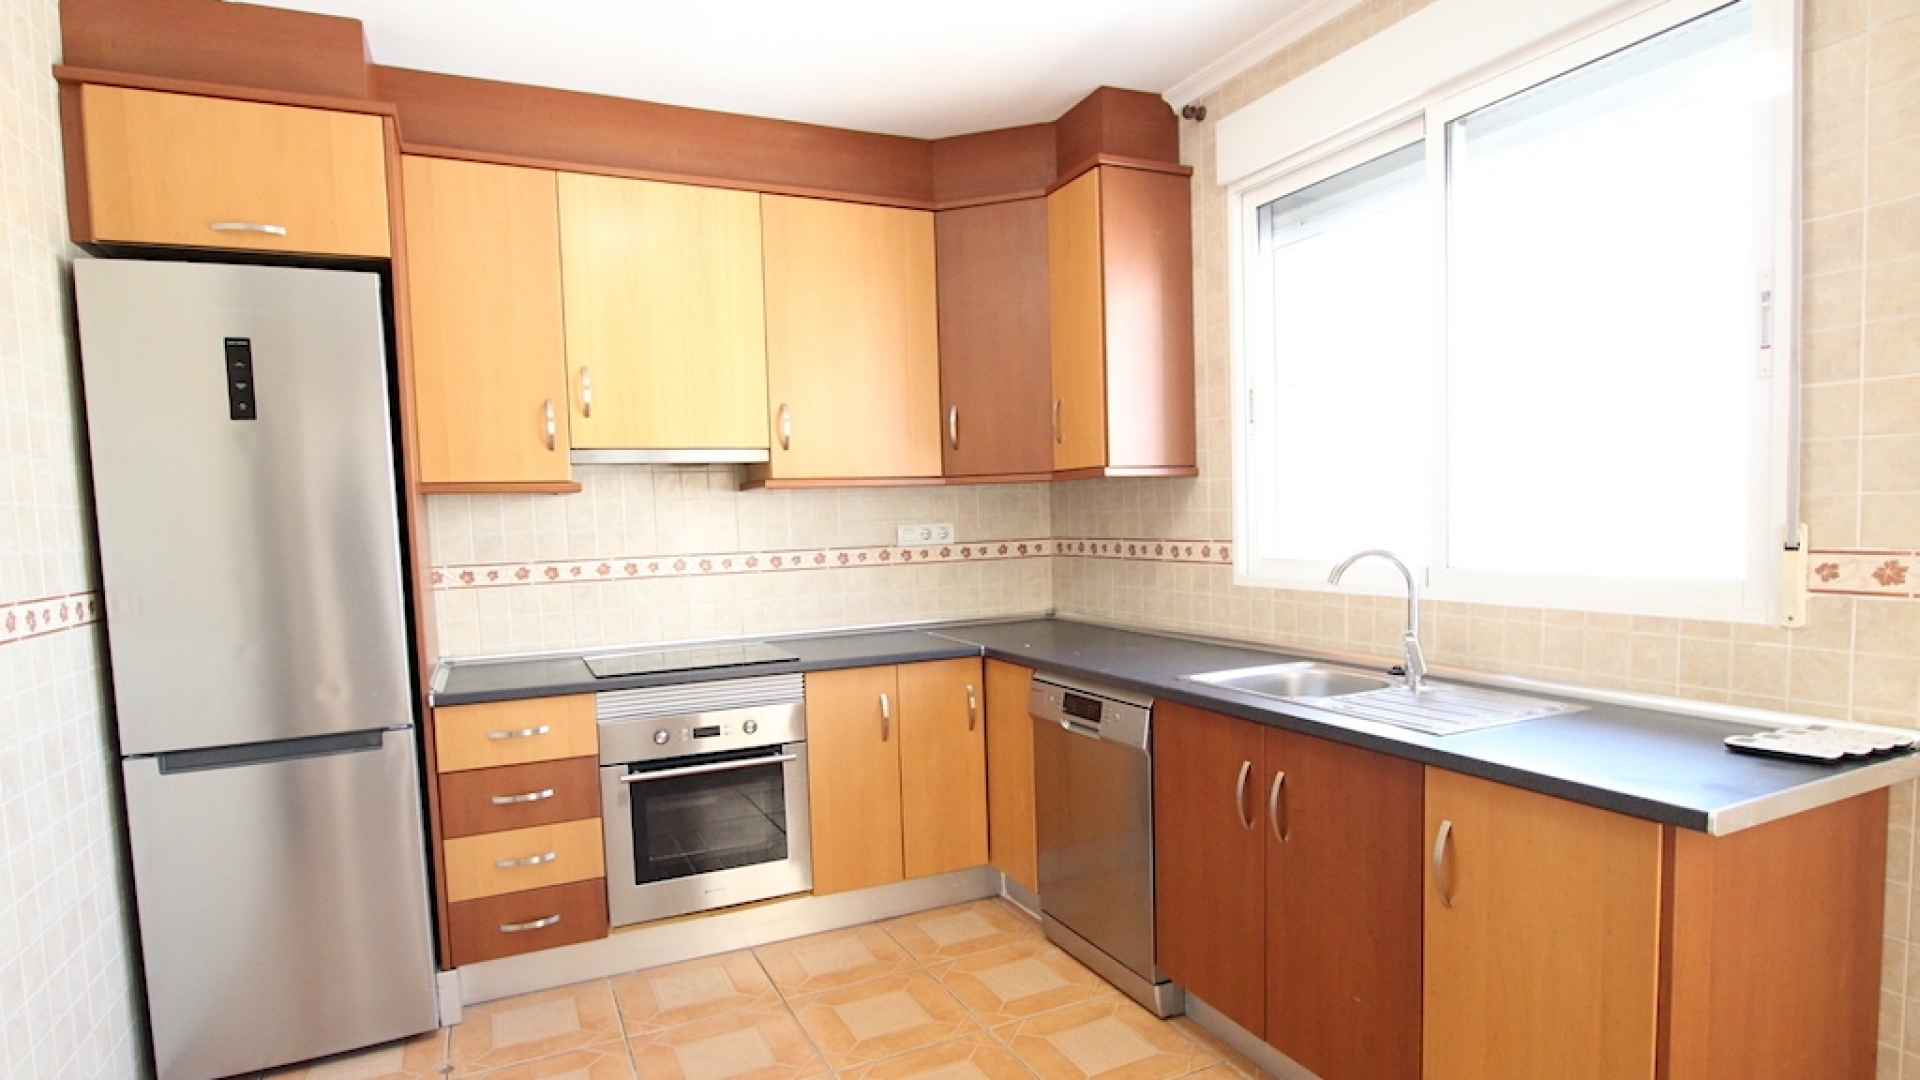 48100_charming_3_bedroom_detached_villa_with_golf_course_views_310523142108_img_3993